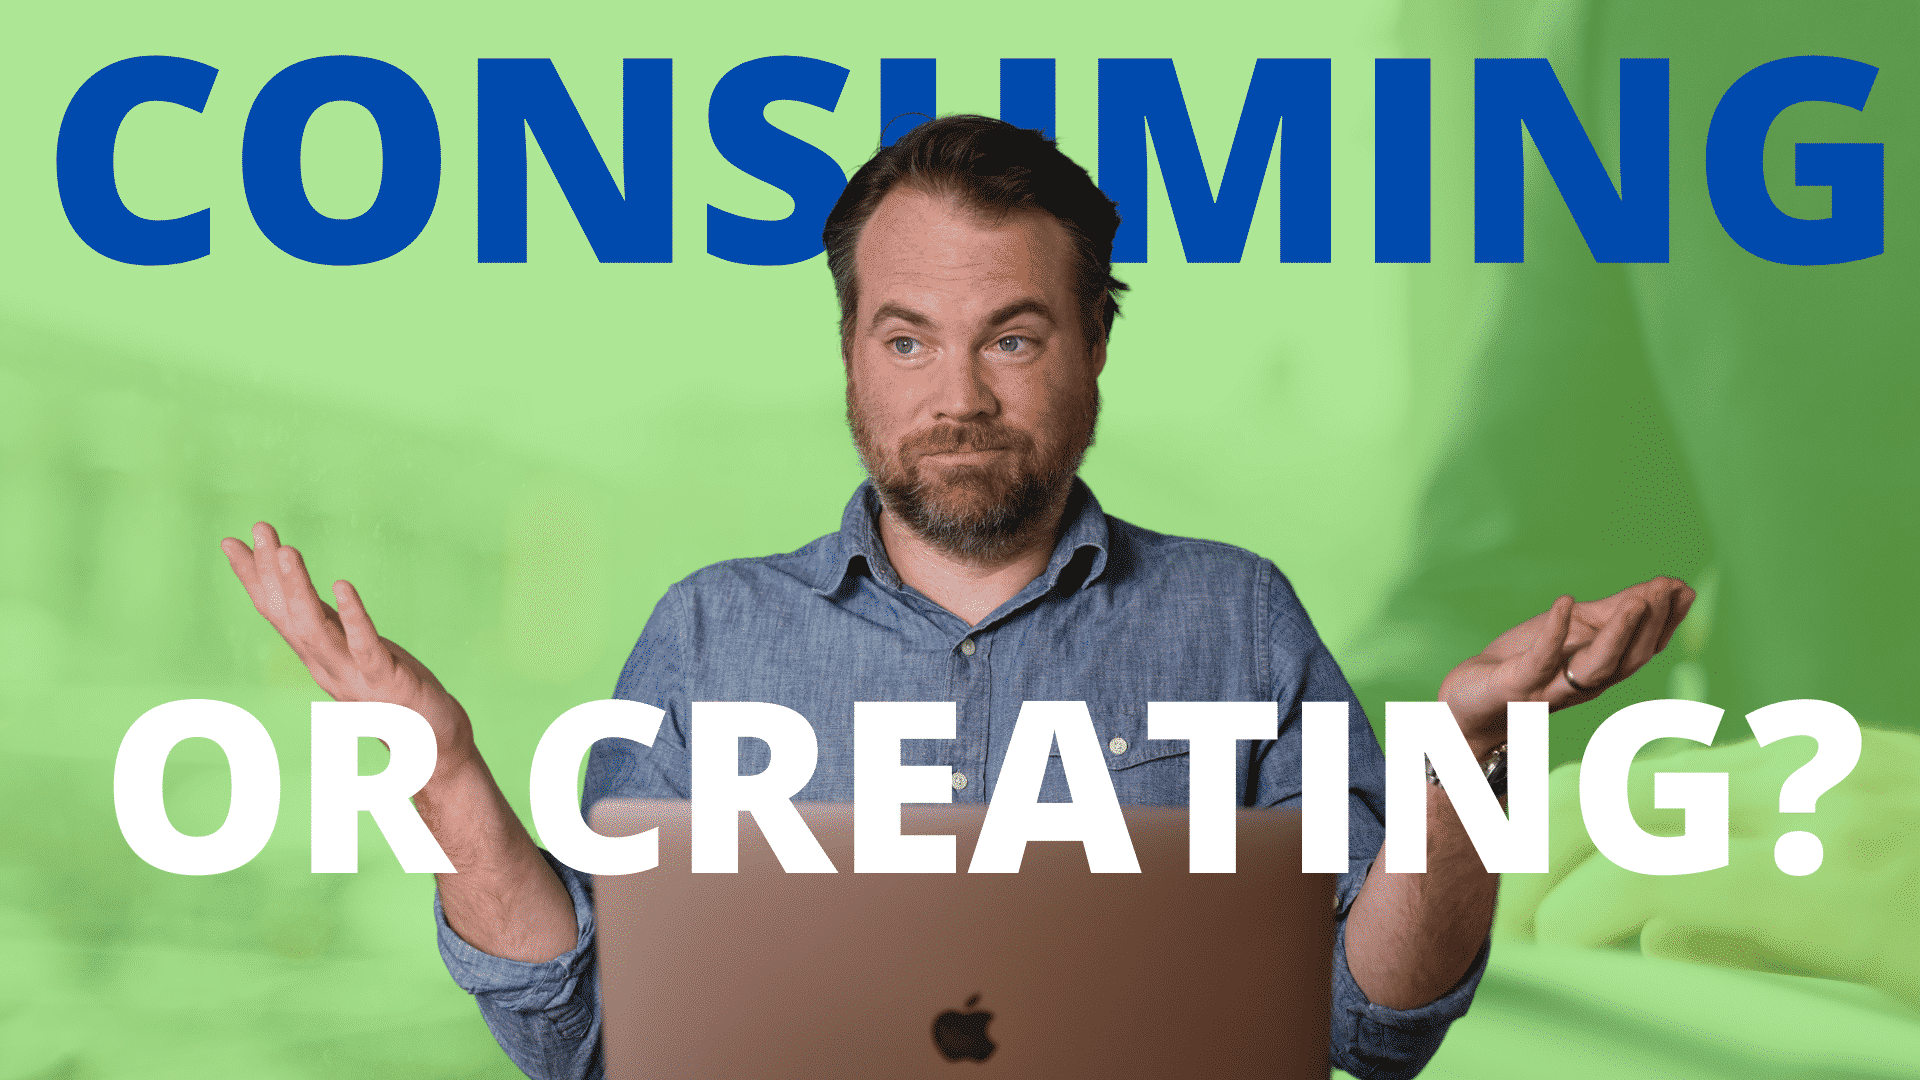 Are you Consuming or Creating?